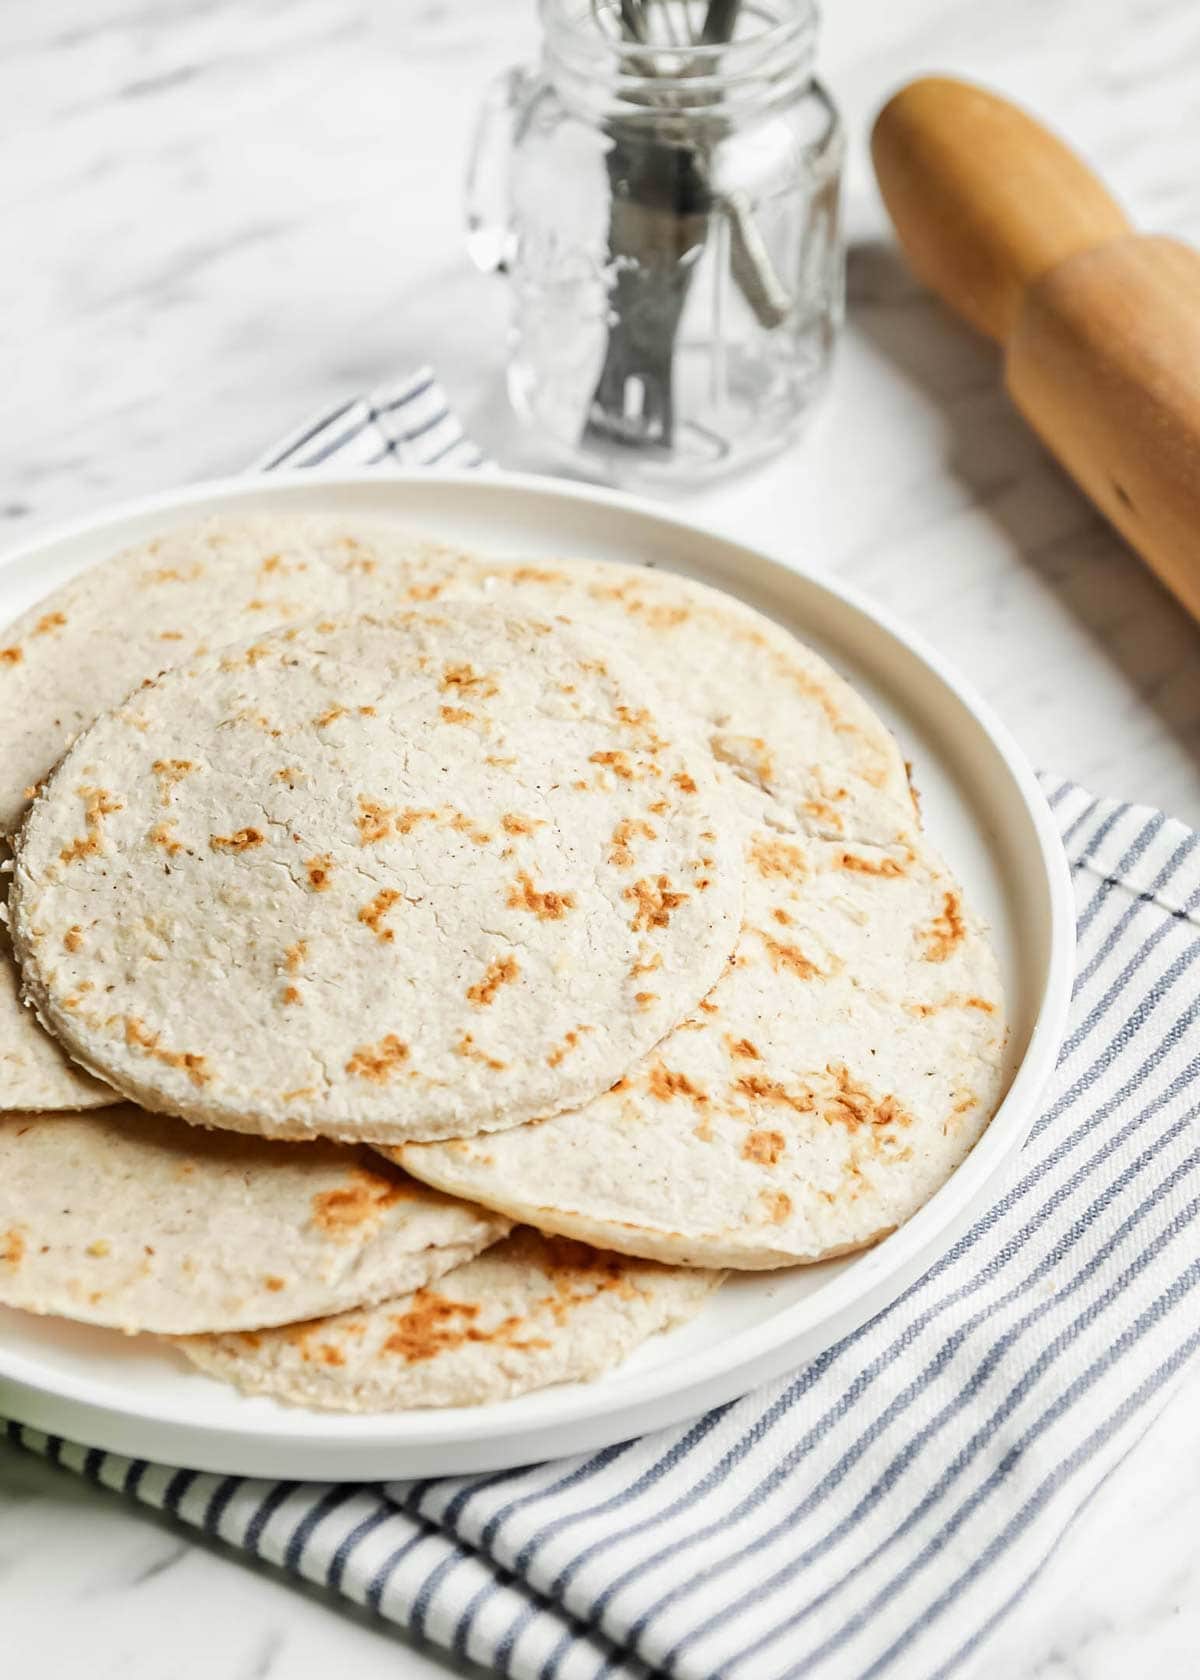 Low carb flour tortillas spread out on a plate